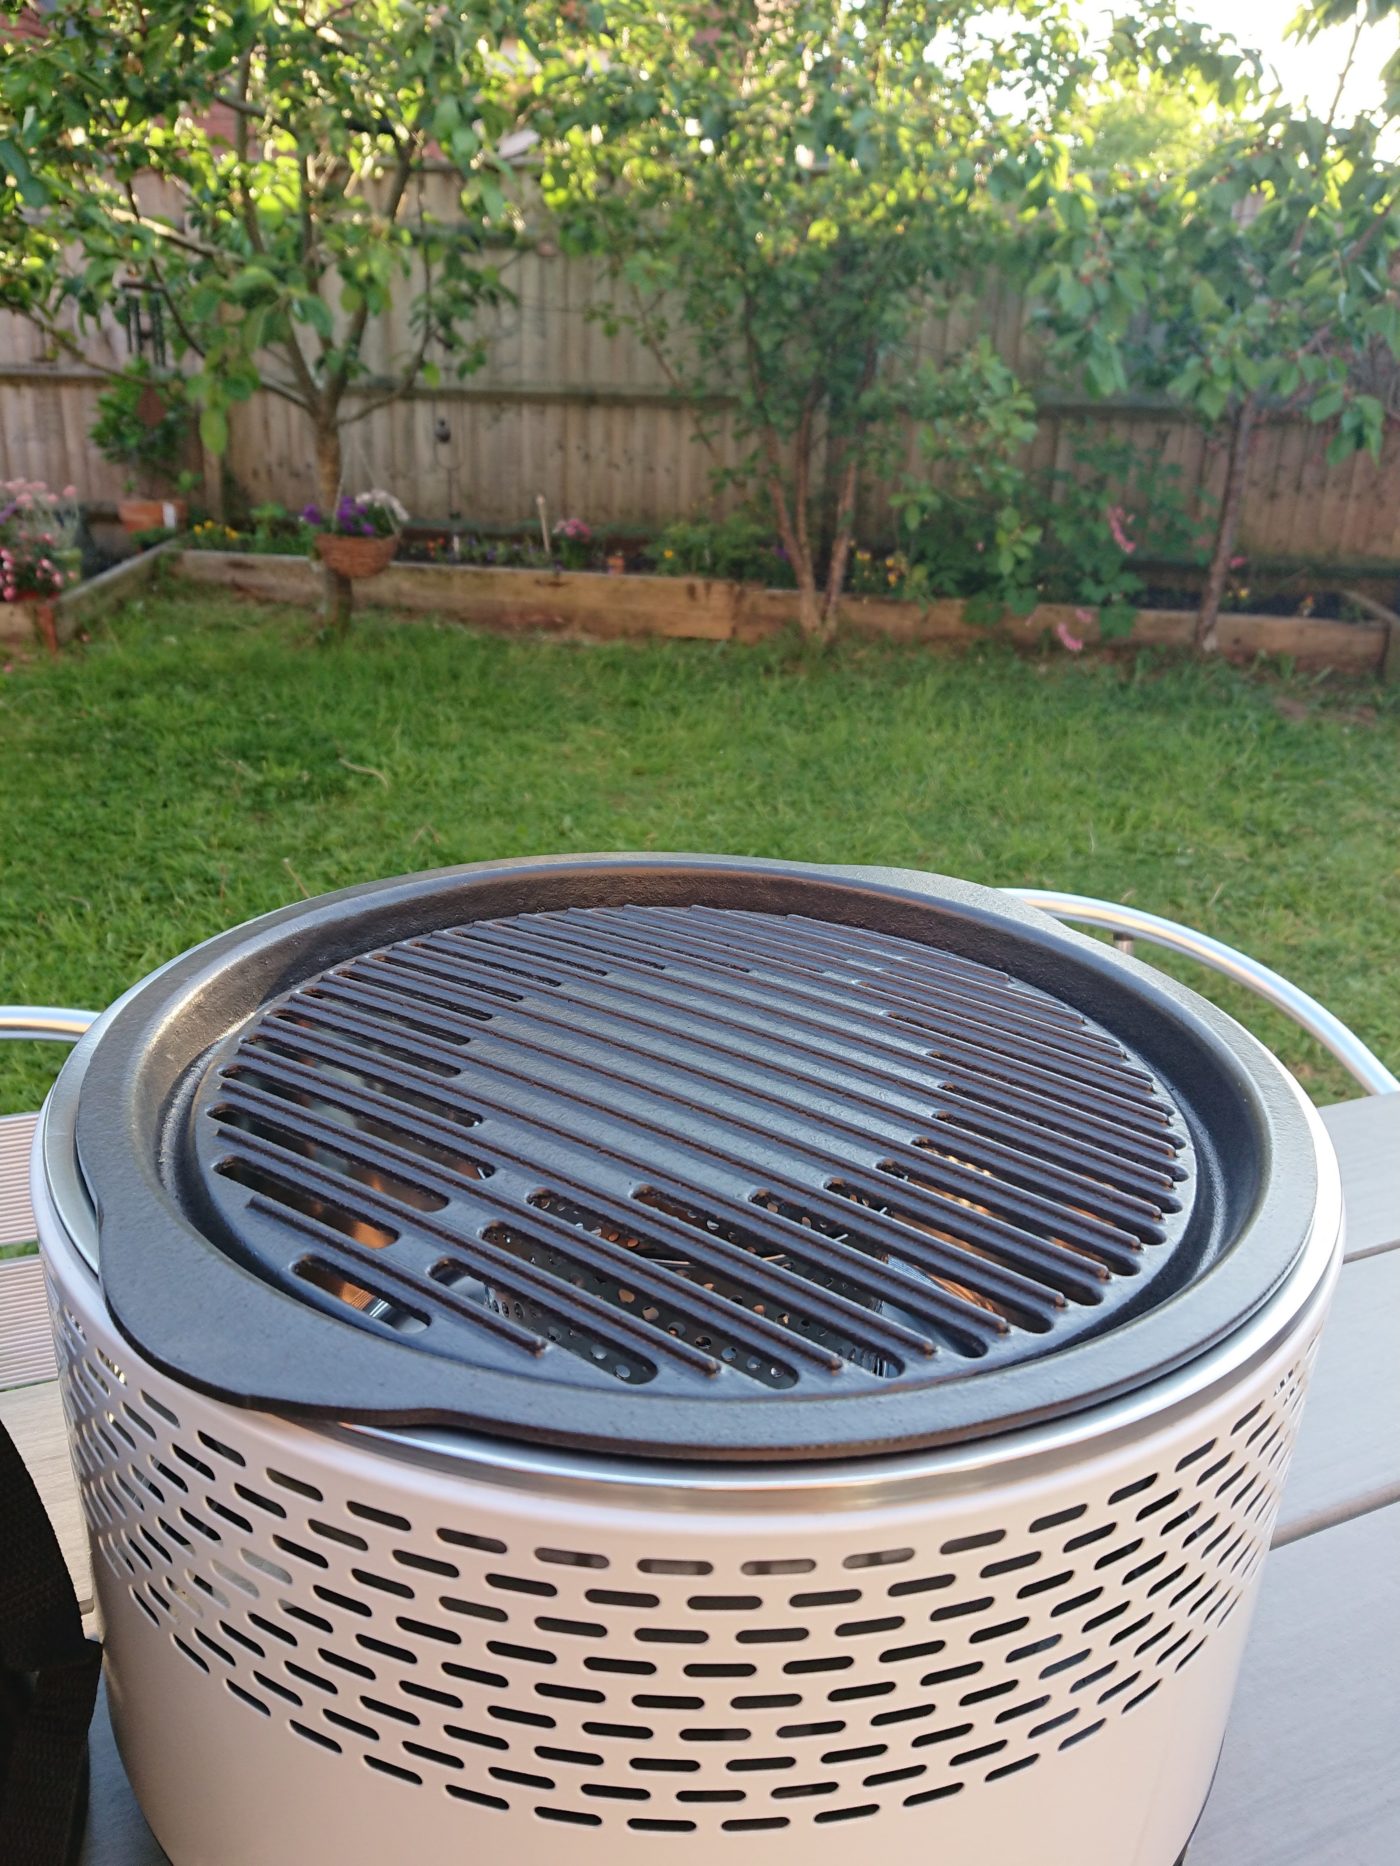 May Product of the Month - Al Fresco Smokeless BBQ Grill